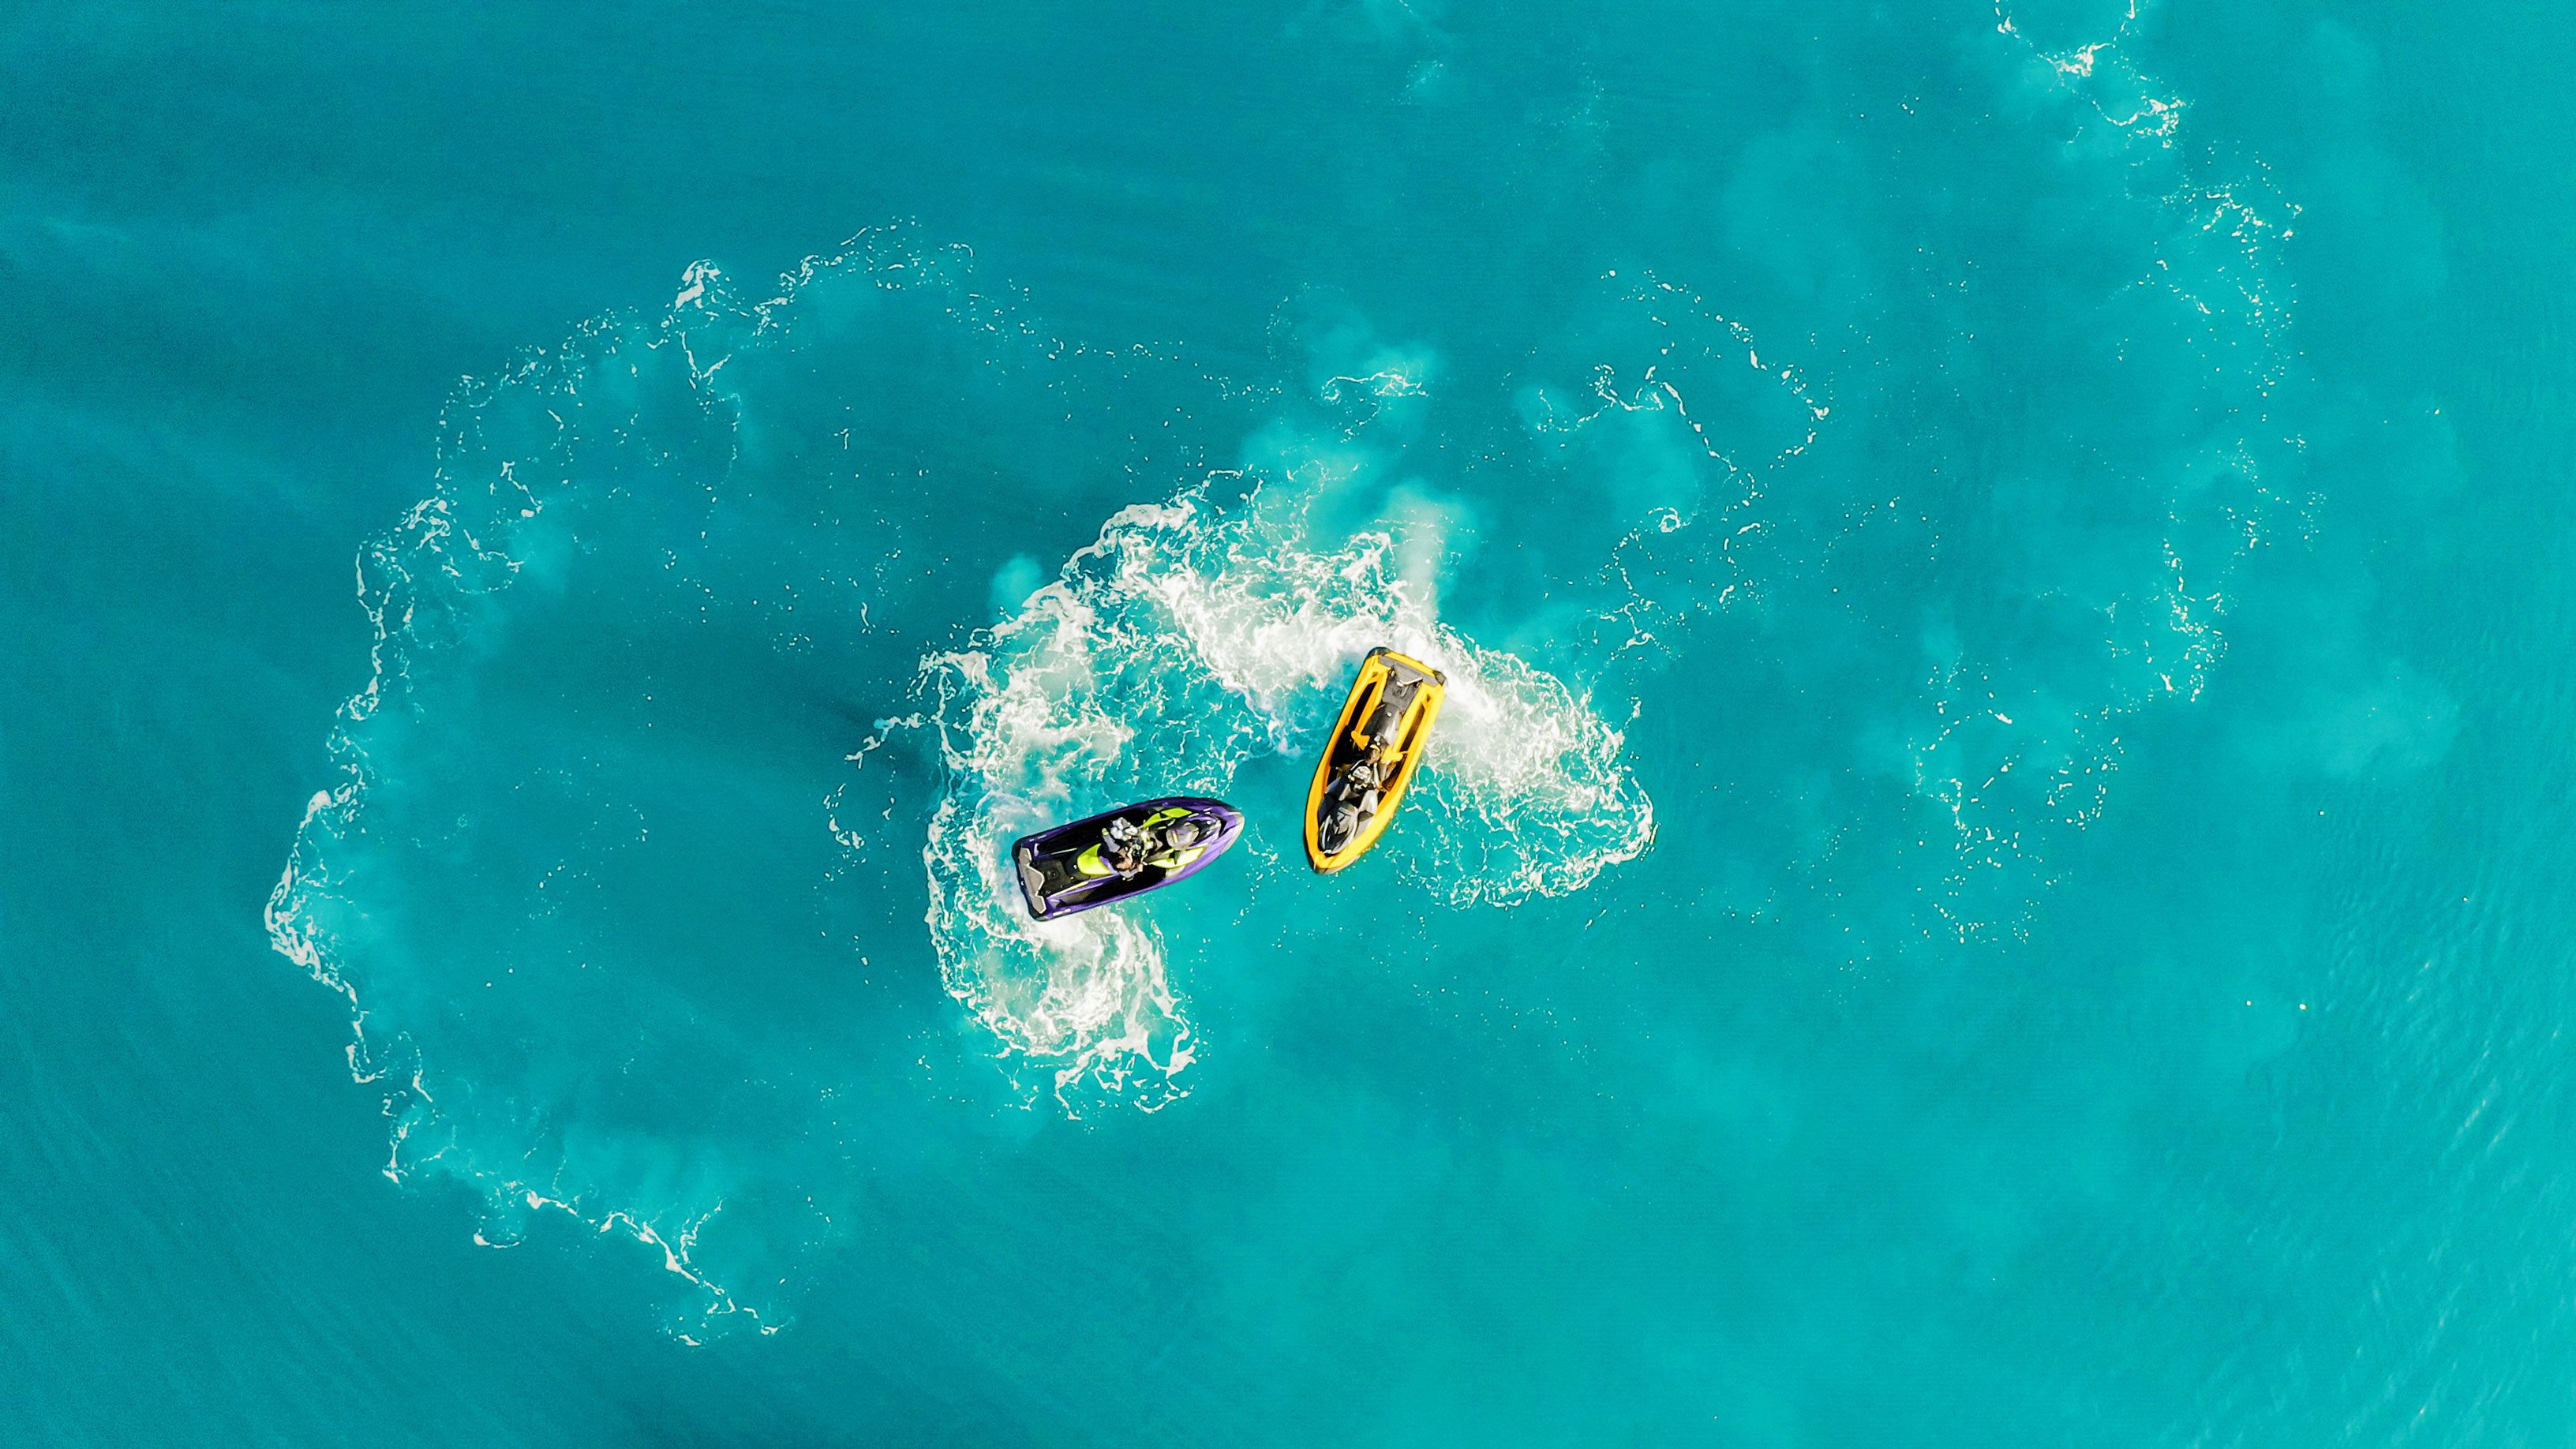 Birdview of Sea-Doo RXP-X and RXT-X